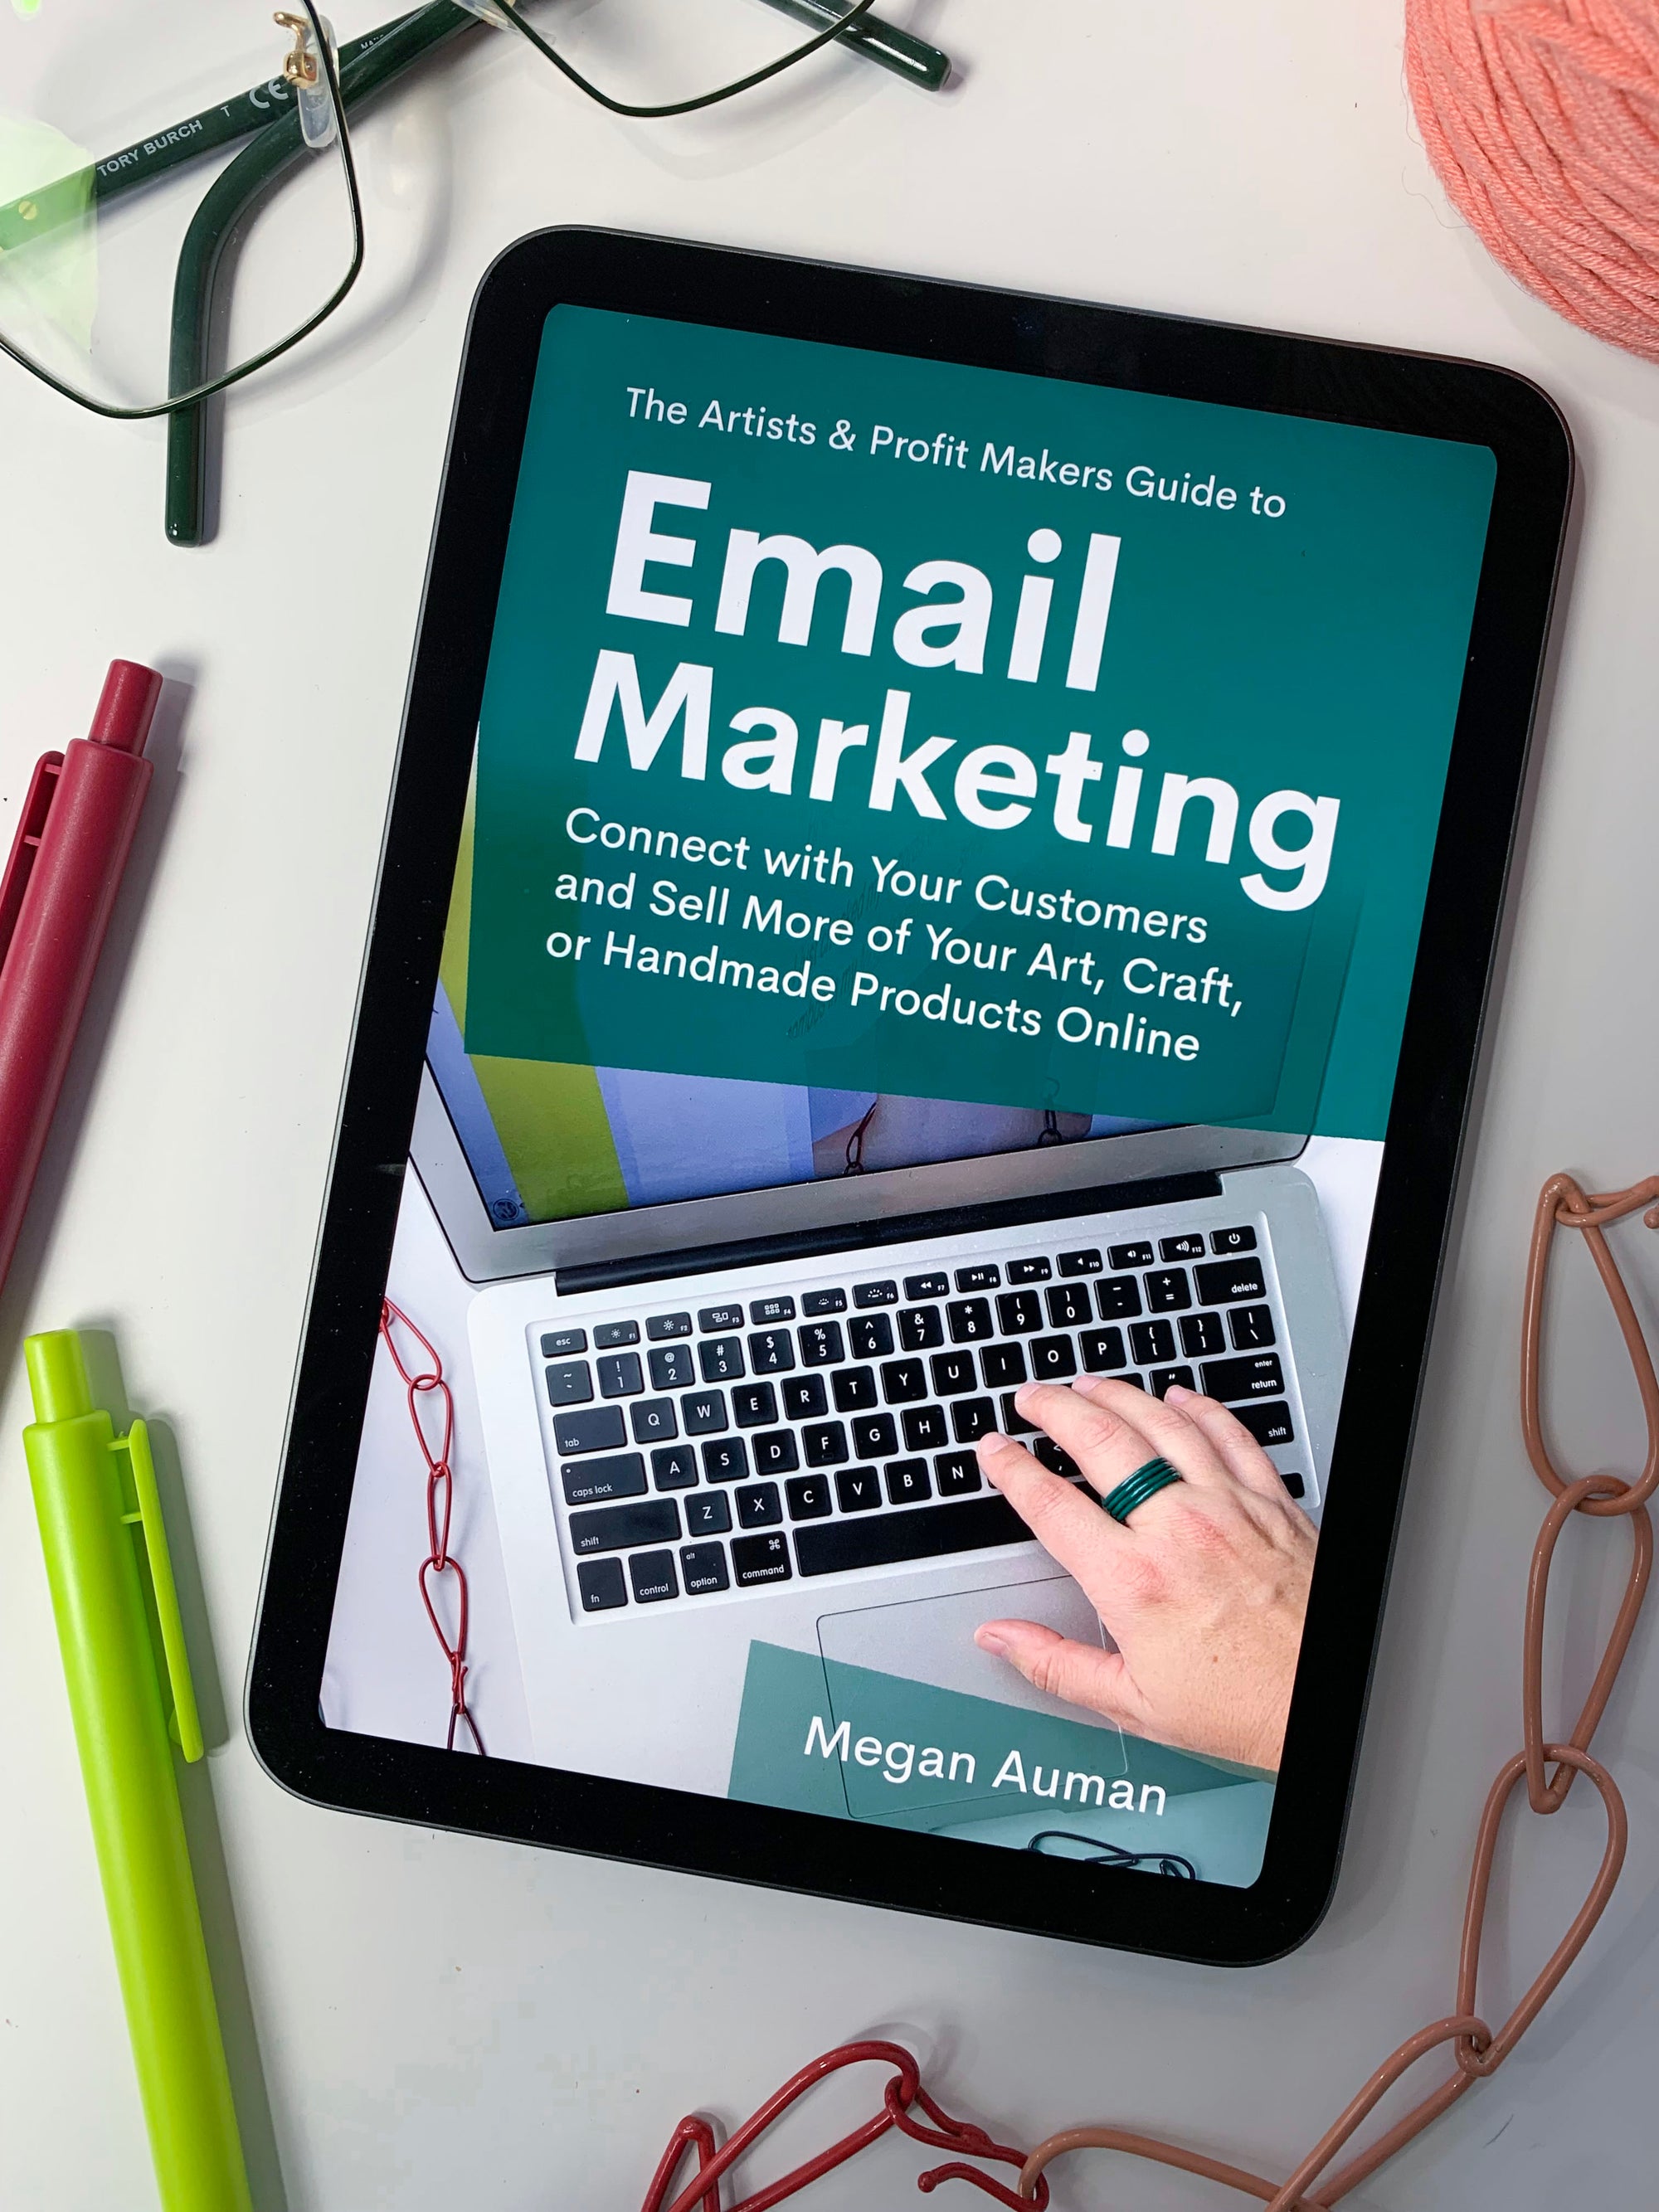 The Artists & Profit Makers Guide to Email Marketing Digital Edition